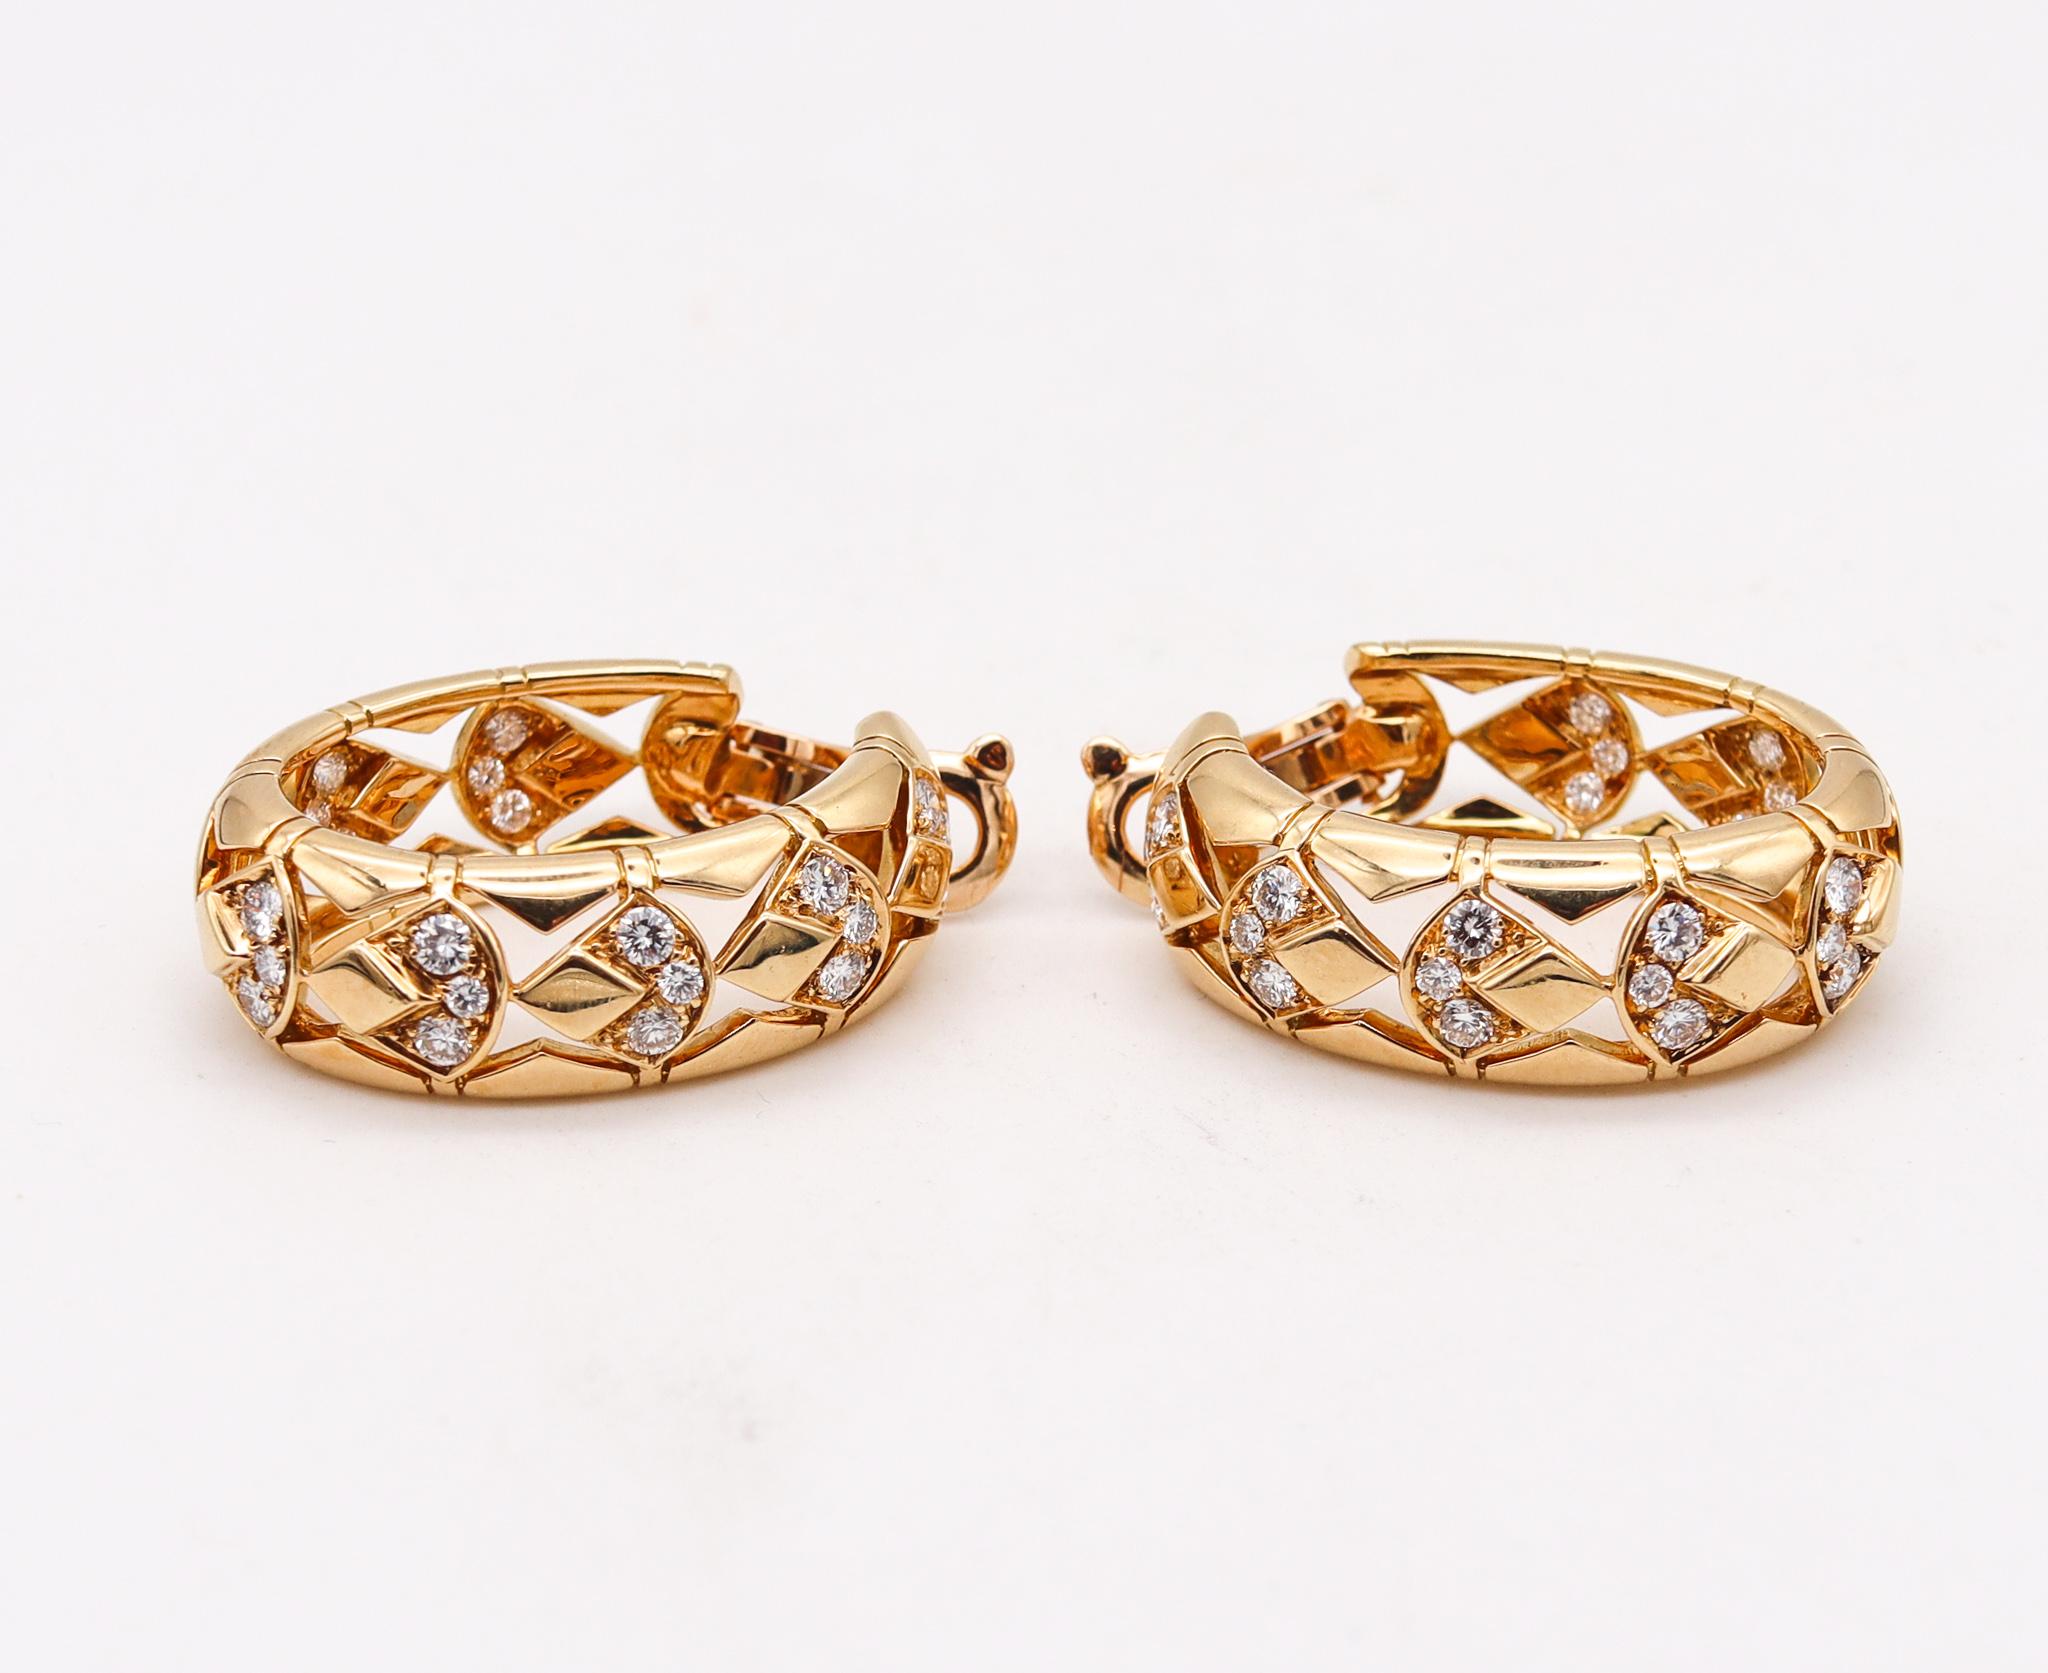 Brilliant Cut Cartier Paris Oval Hoops Earrings in 18Kt Yellow Gold with 2.84 Cts VVS Diamonds For Sale